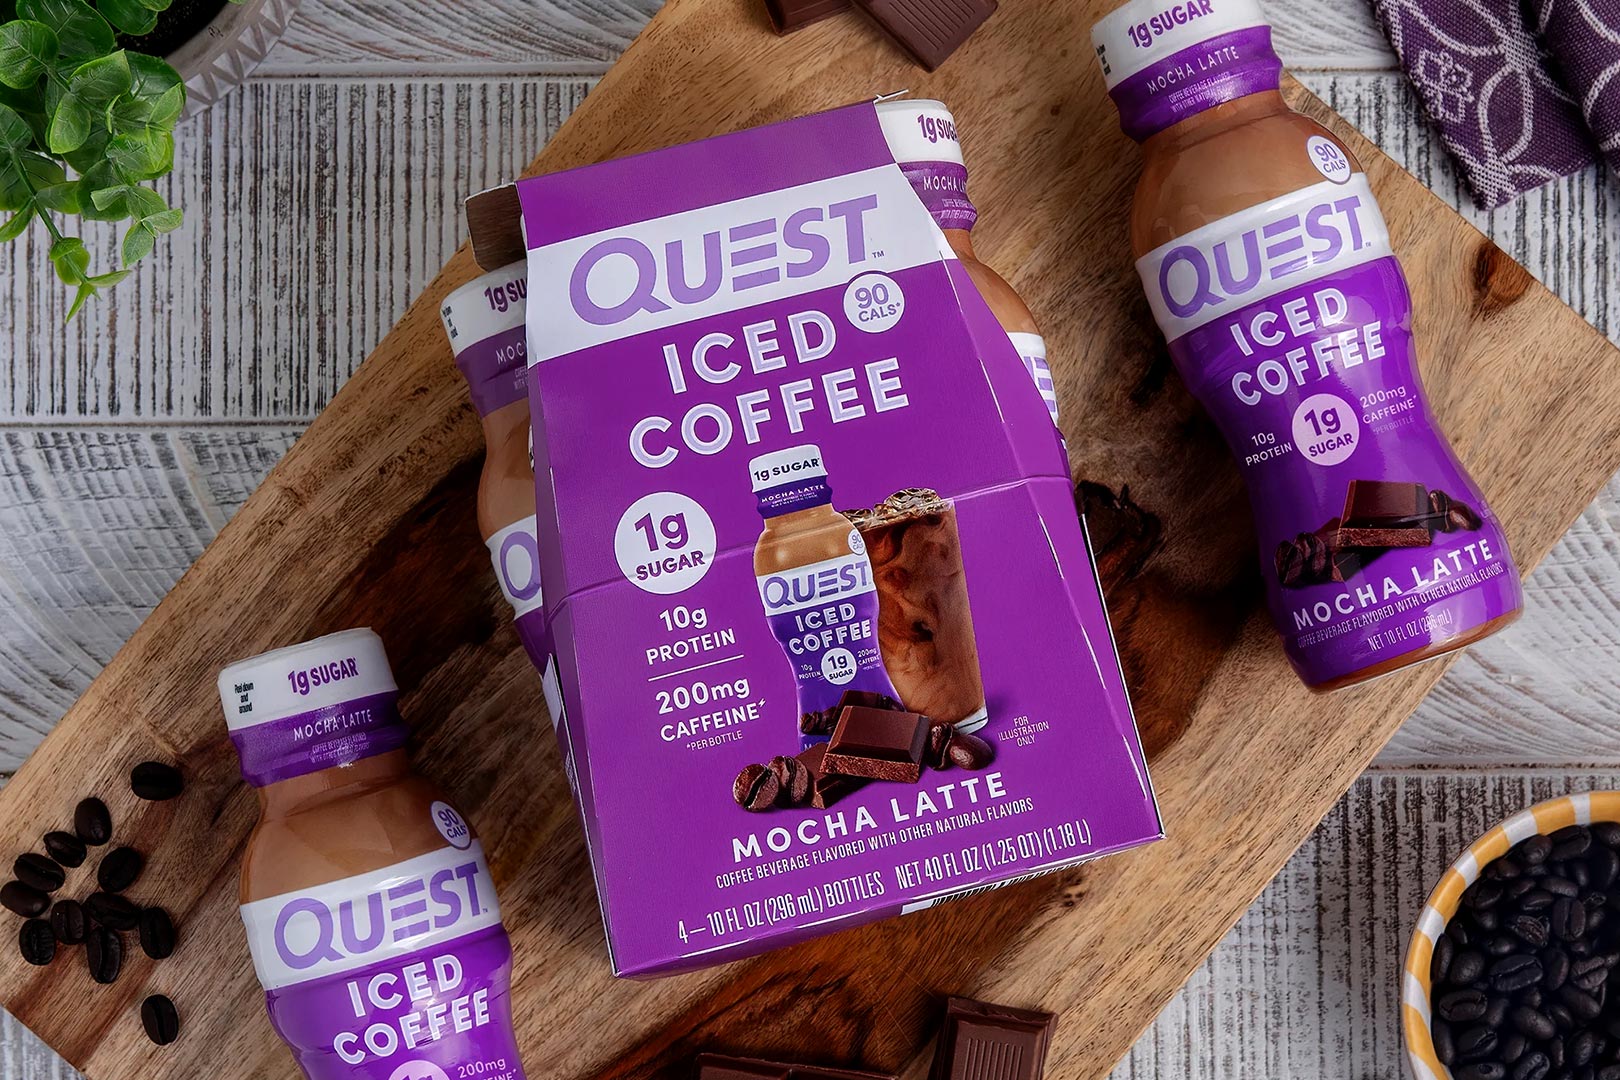 Quest Nutrition introduces Quest Iced Coffee with 10g of protein